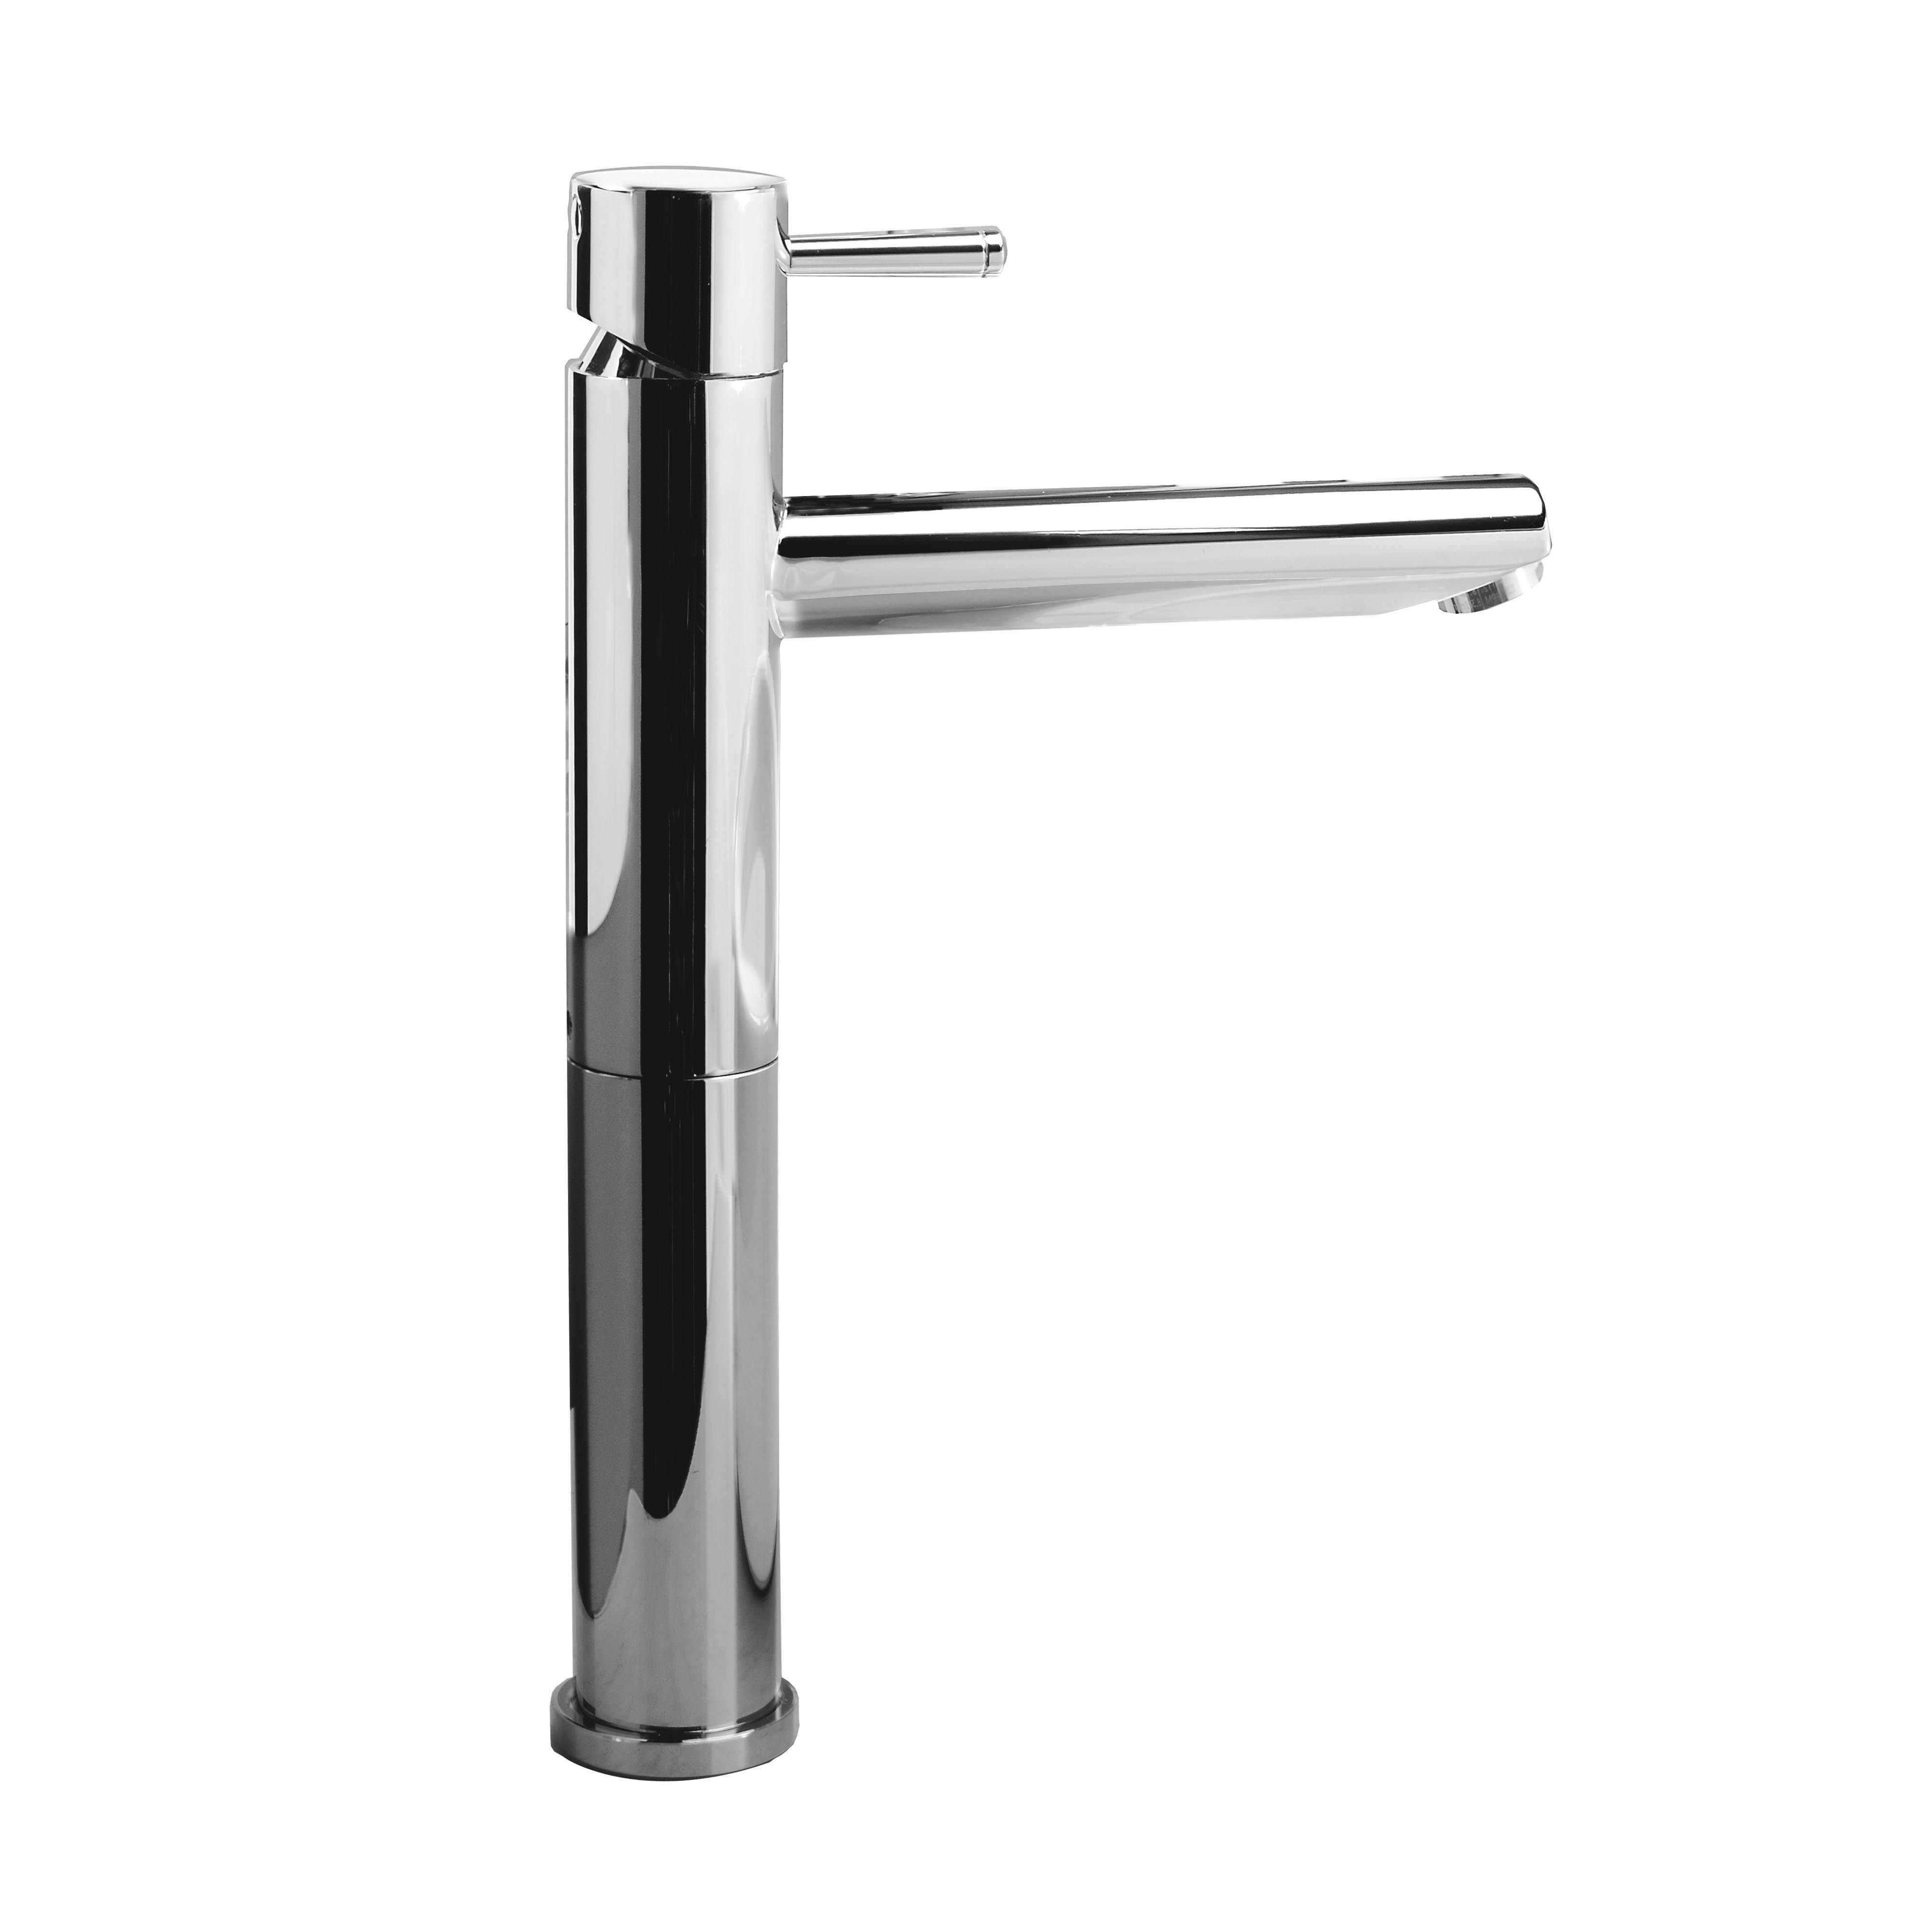 American Standard 2064.152.002 Serin® Monoblock Single Control Vessel Bathroom Faucet, 6-7/8 in Spout, 9-1/8 in H Spout, Polished Chrome, 1 Handles, Grid Drain, Import